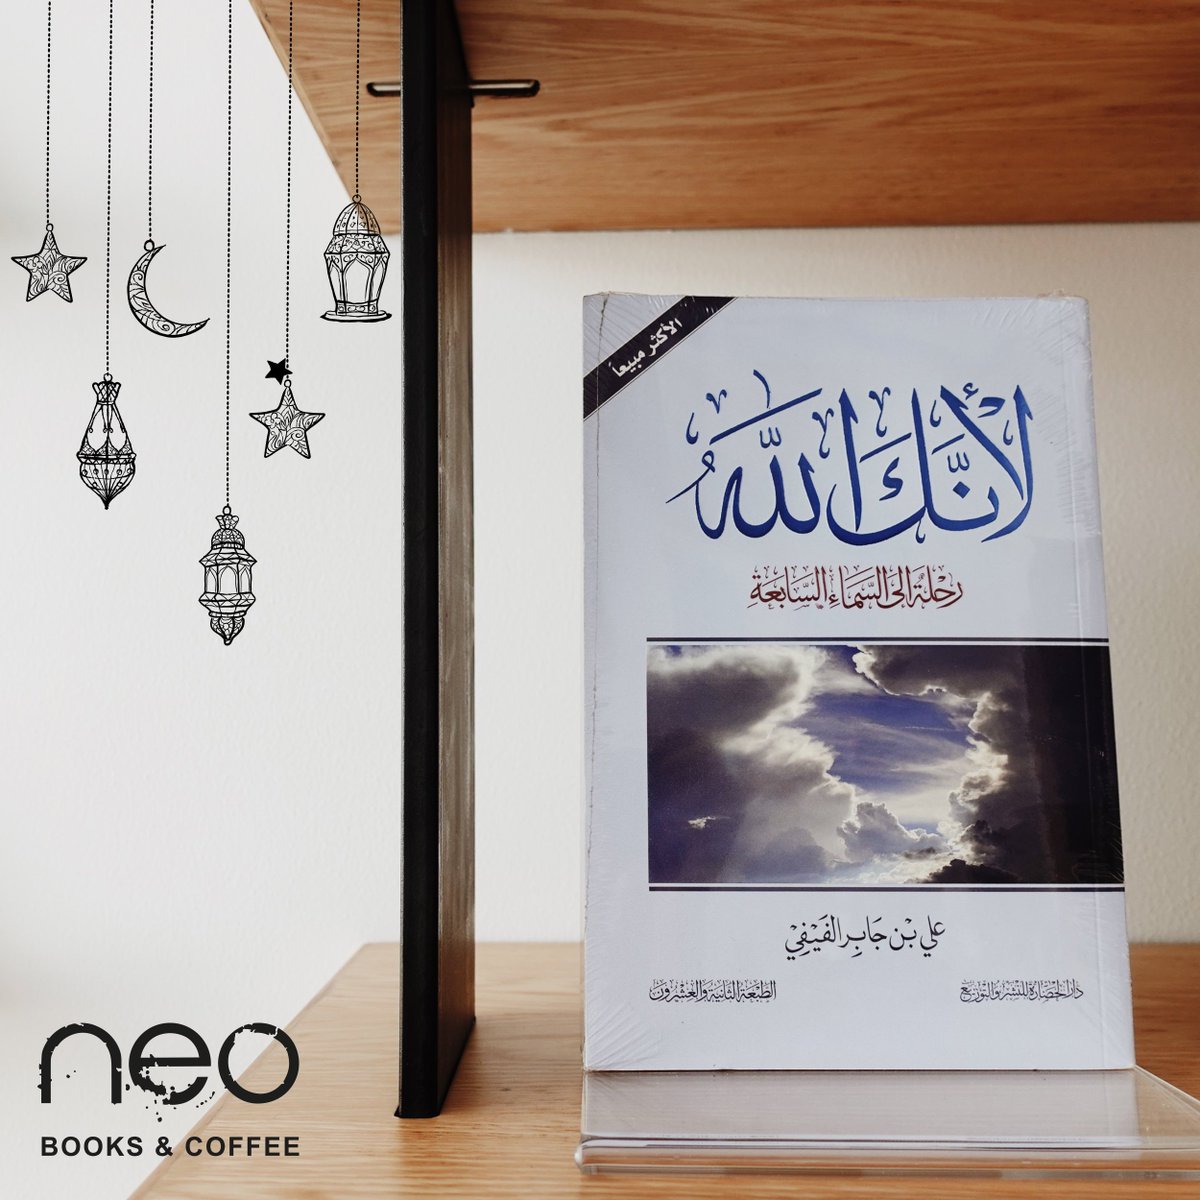 'Without learning the meaning of the names of Allah, surely, we are at loss in a vast desert.' Because you are Allah, available now. 🌙

#neobooksandcoffee #bookstore #bookcafe #ramadanbooks #islamicbooks #books #stationery #riffapalms #bahrain